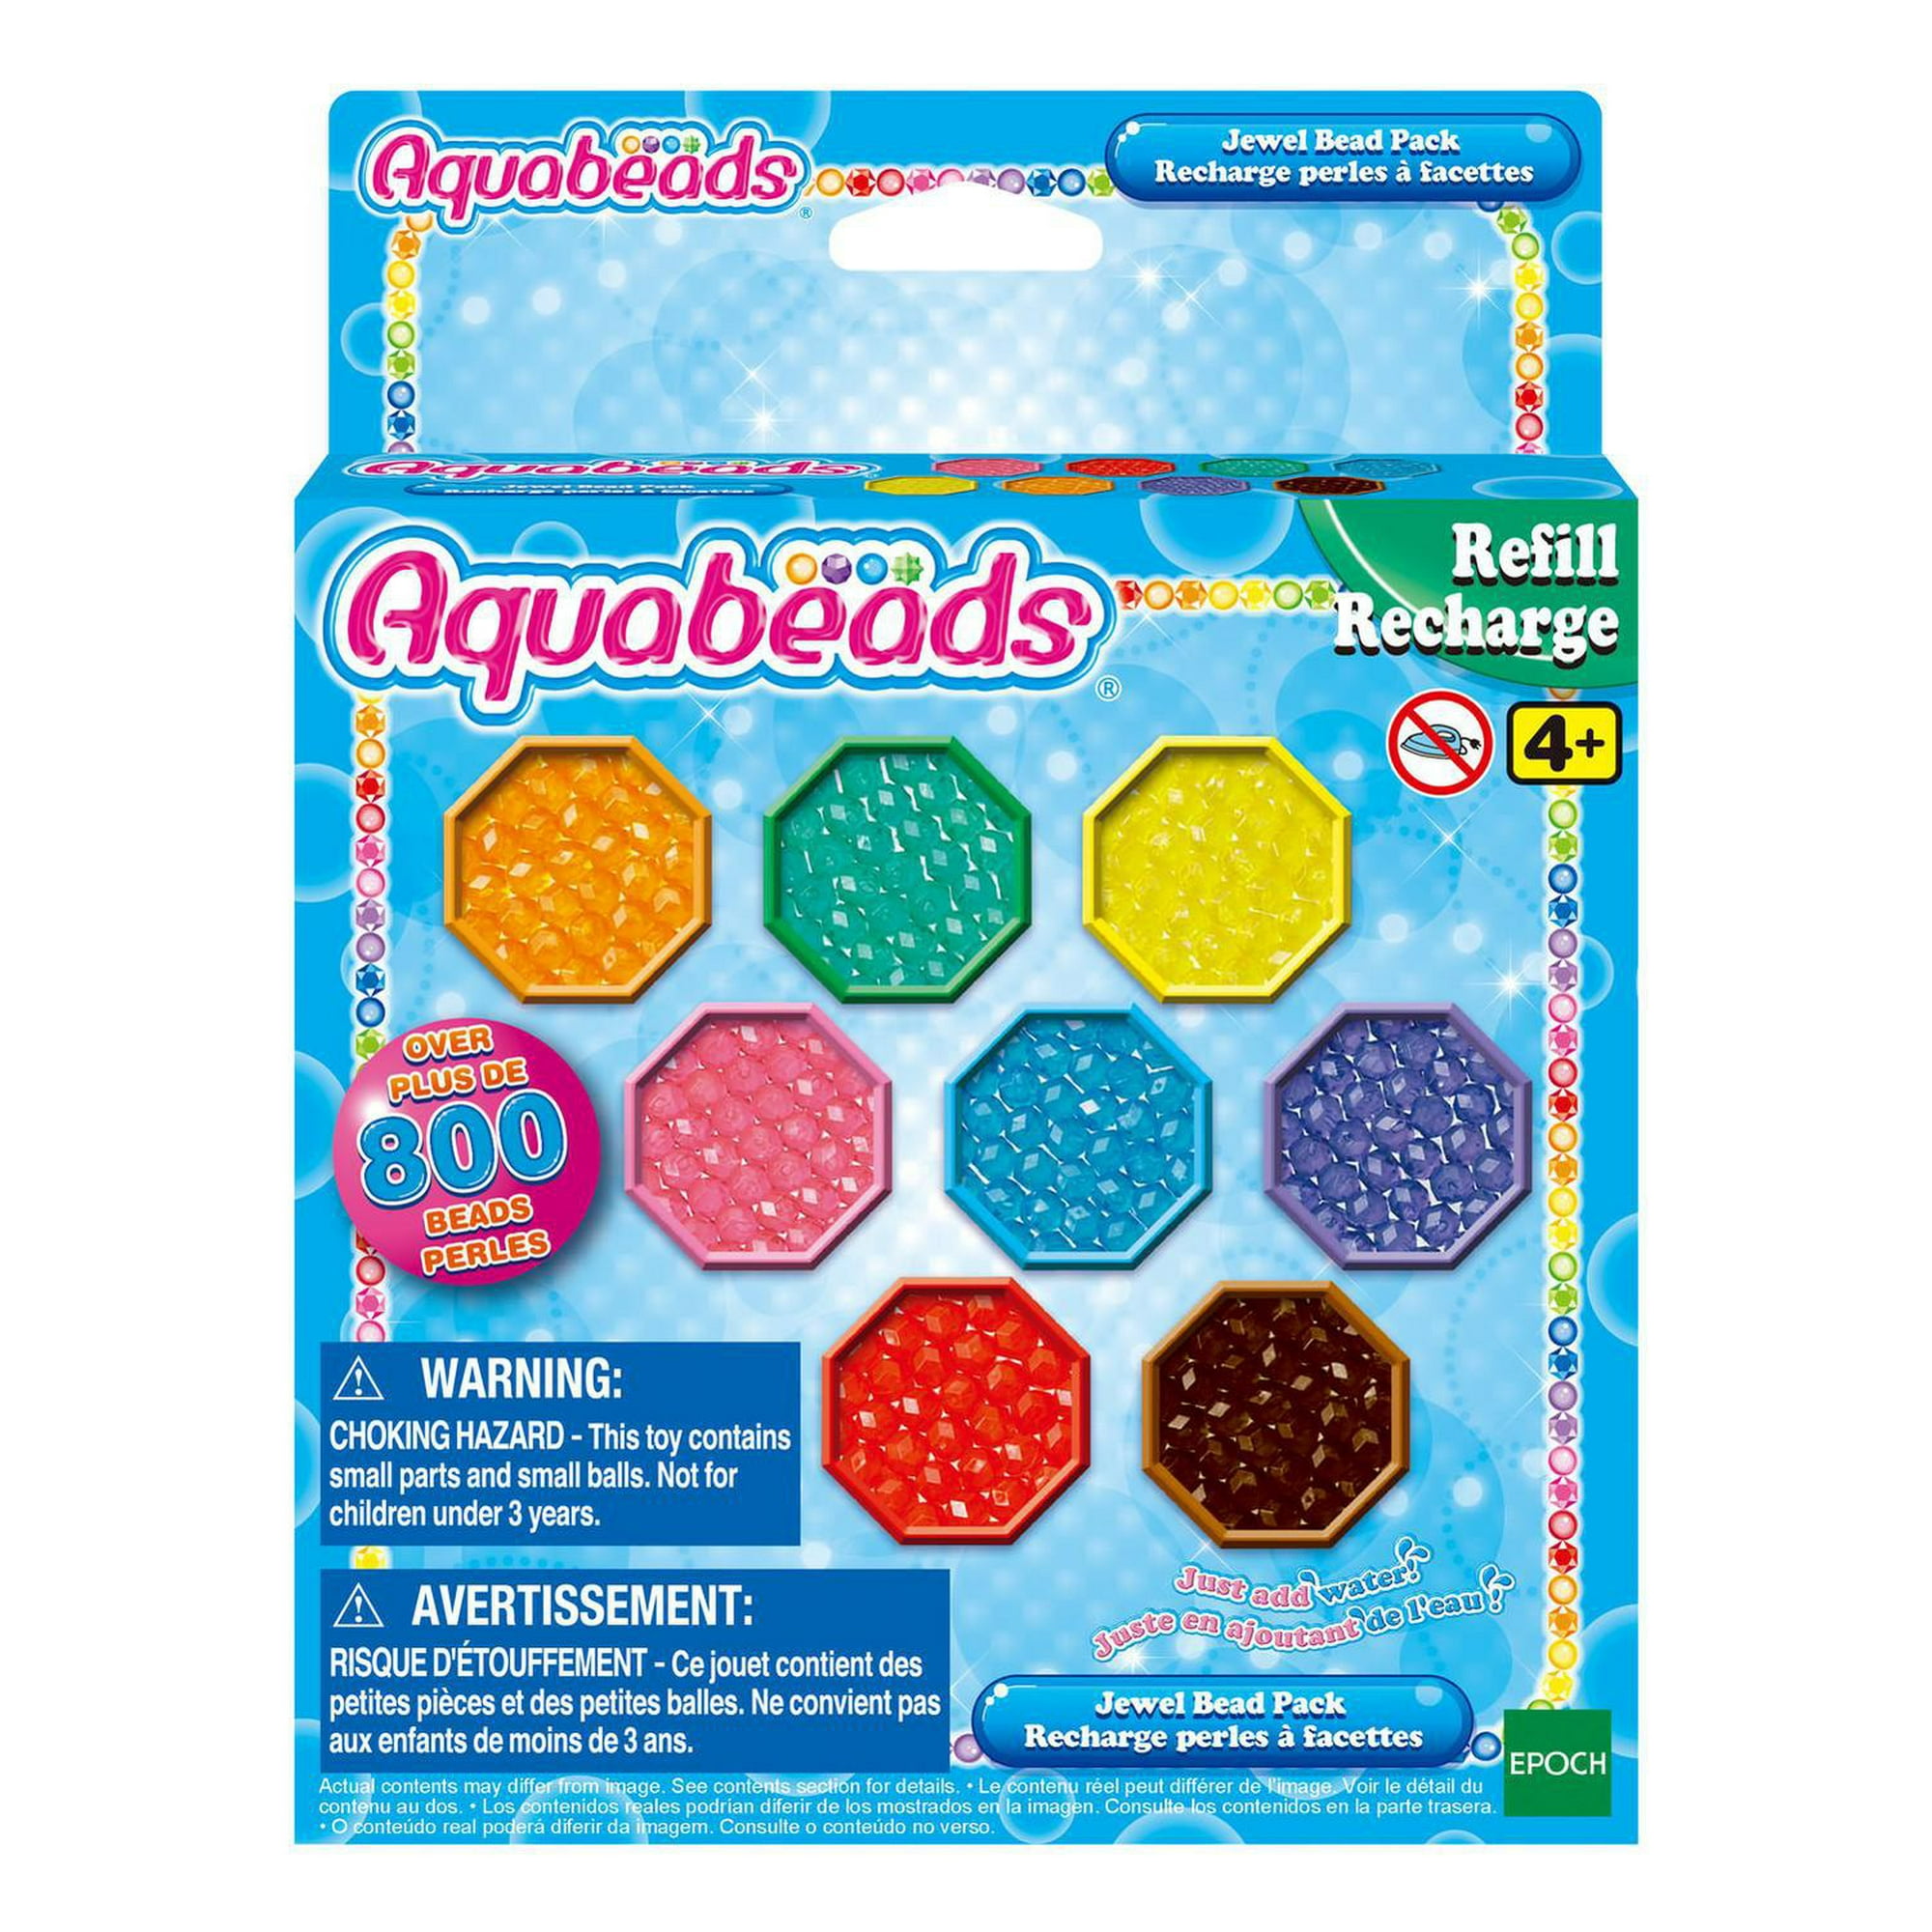 Aquabeads Jewel Bead Pack, Arts & Crafts Bead Refill Kit for Children -  over 800 jewel beads in 8 colors 